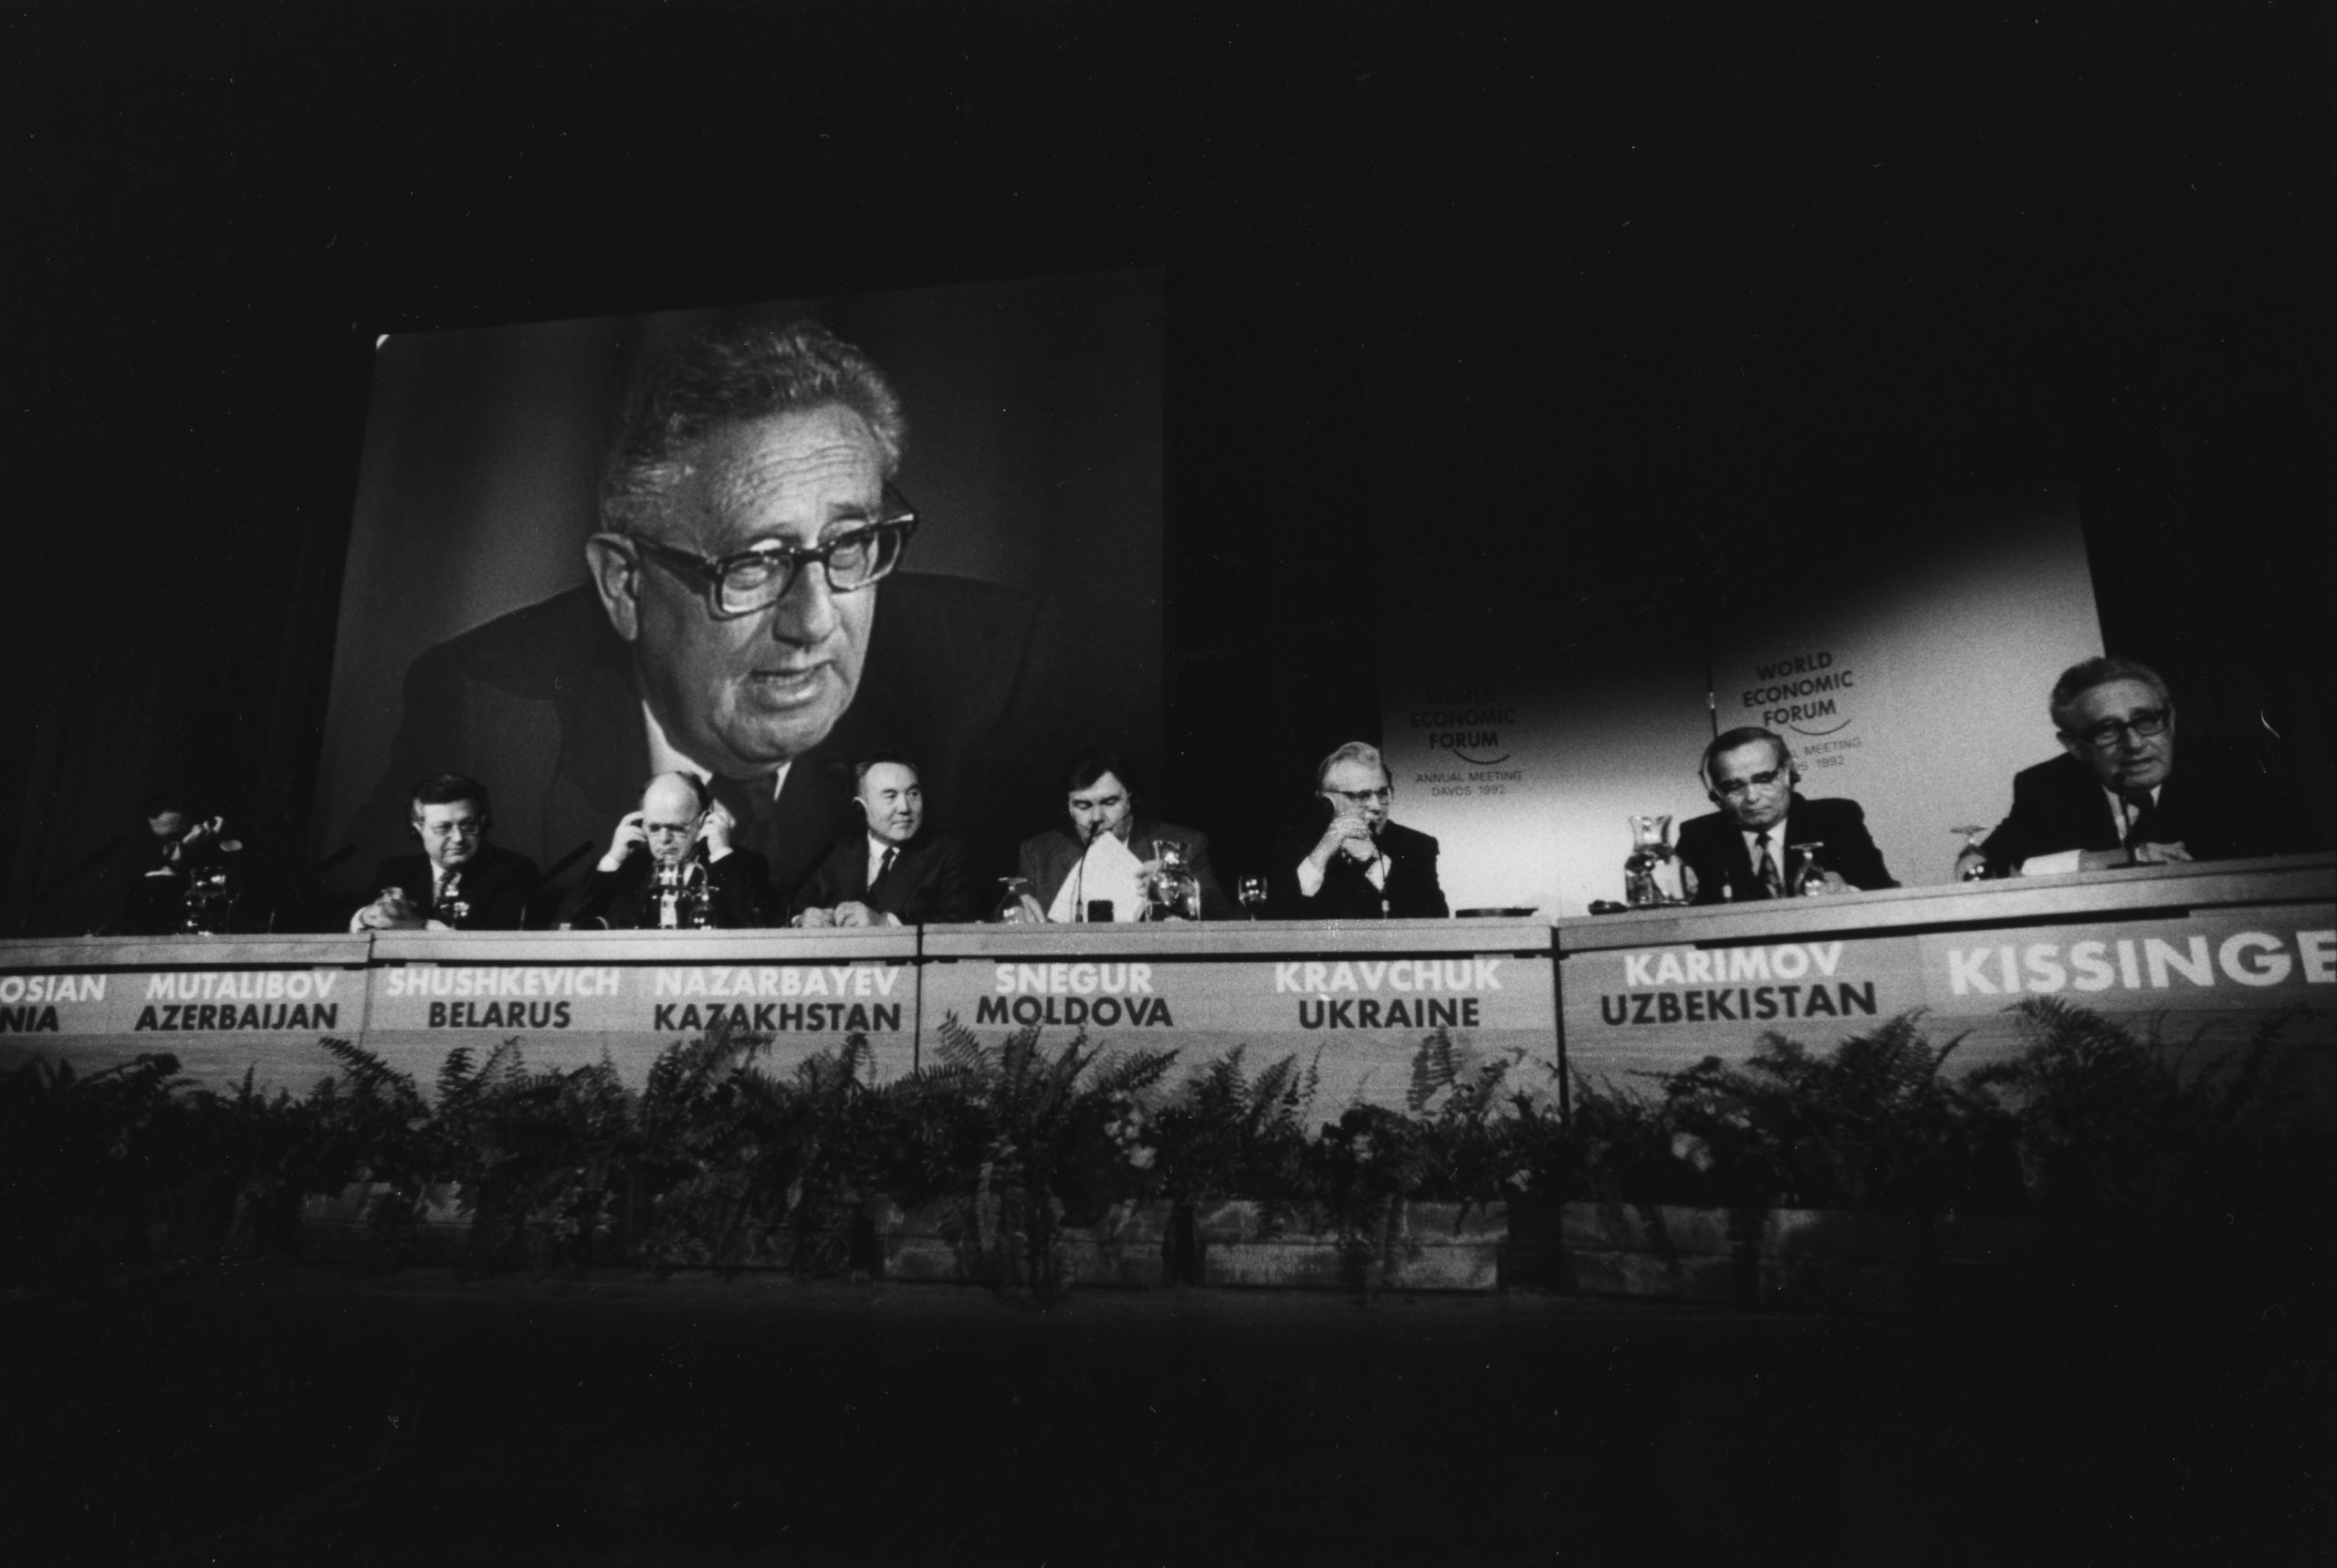 Henry Kissinger speaks on a panel at the World Economic Forum, in Davos, in 1992.